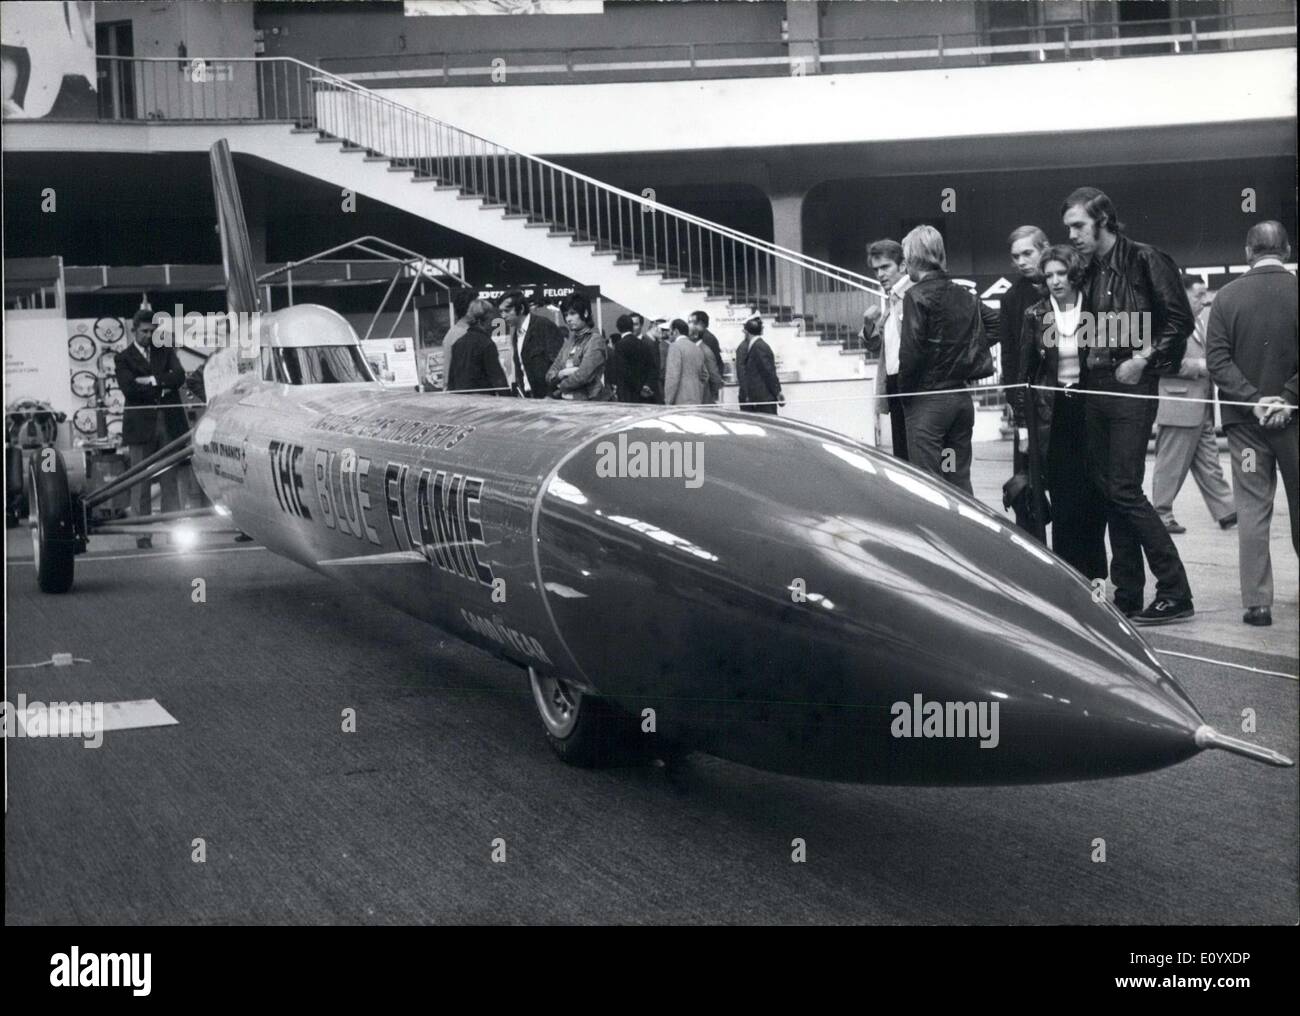 Sep. 21, 1971 - Rocket-Car holding the World record at the ''Auto-Mechanika 71'' in Frankfurt:The fastest vehicle on land in the world..is the rocket-car called ''Blue Flame'', which reached the unbelievable speed of 1001,667 km/h on the Big Salt Lake in the USA on 23rd October, 1970.(The driver holding this world record is the American Gary Gabelich).The motor of the rocket makes 58000 HP, the 39 ft long vehicle is 6614 Ibs heavy.The super-car can be seen for the first time in Europe, it has been brought to Frankfurt by a special transport plane Stock Photo